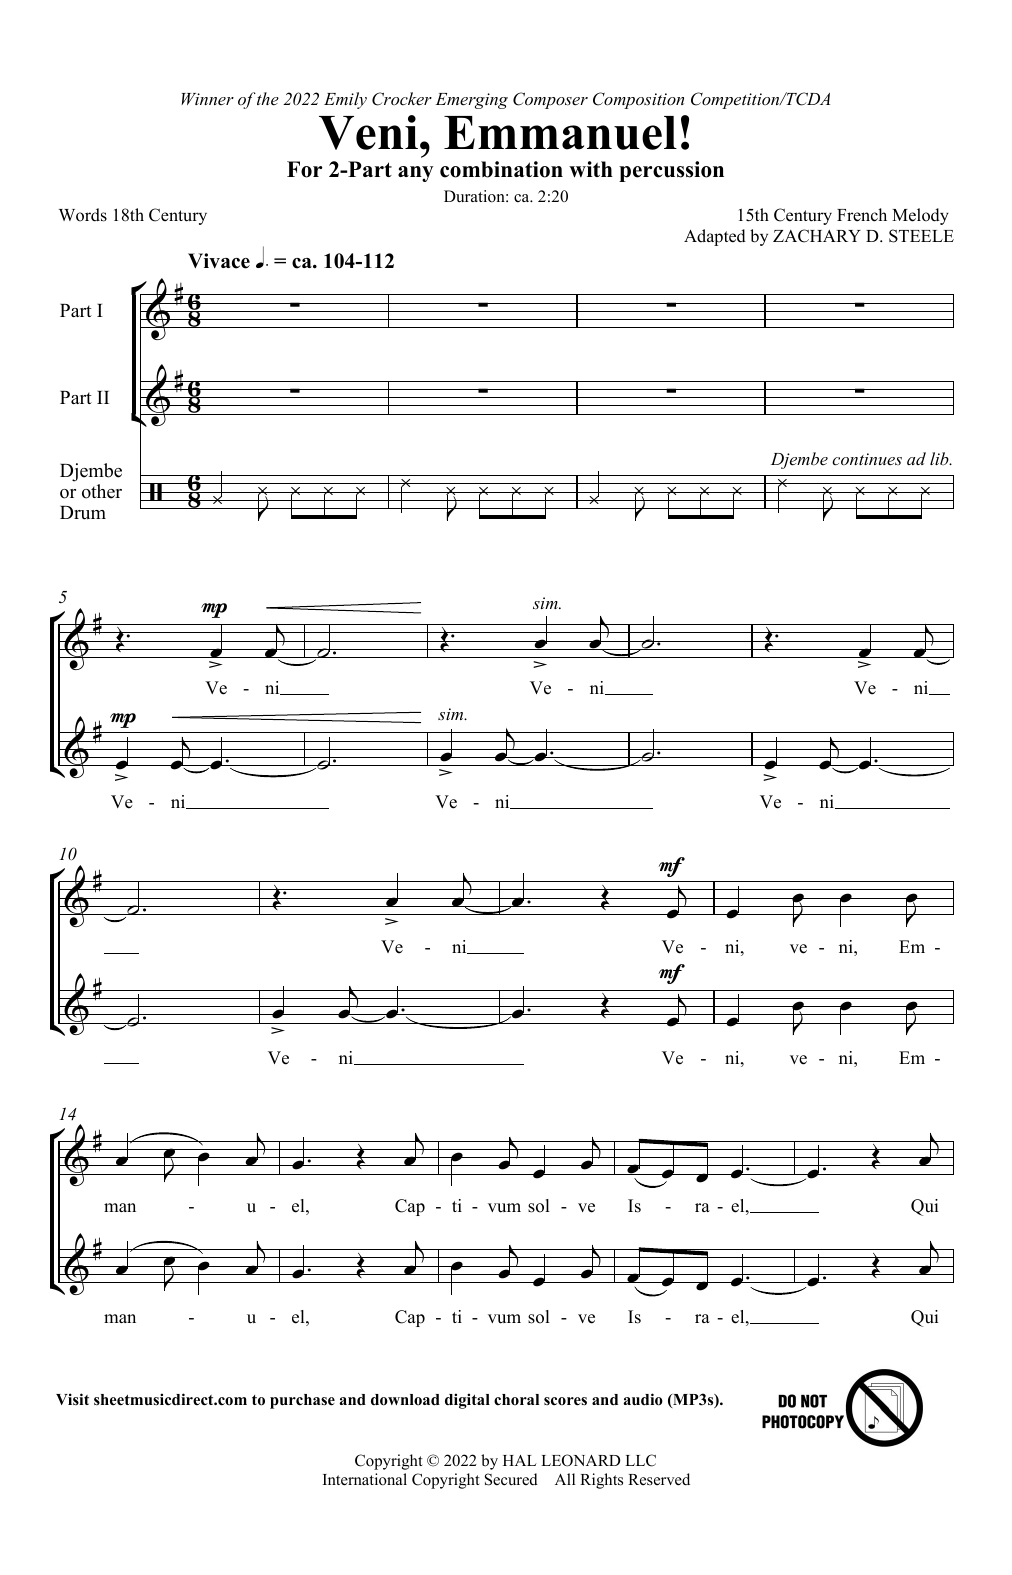 15th Century French Melody Veni, Emmanuel! (arr. Zachary Steele) sheet music notes and chords. Download Printable PDF.